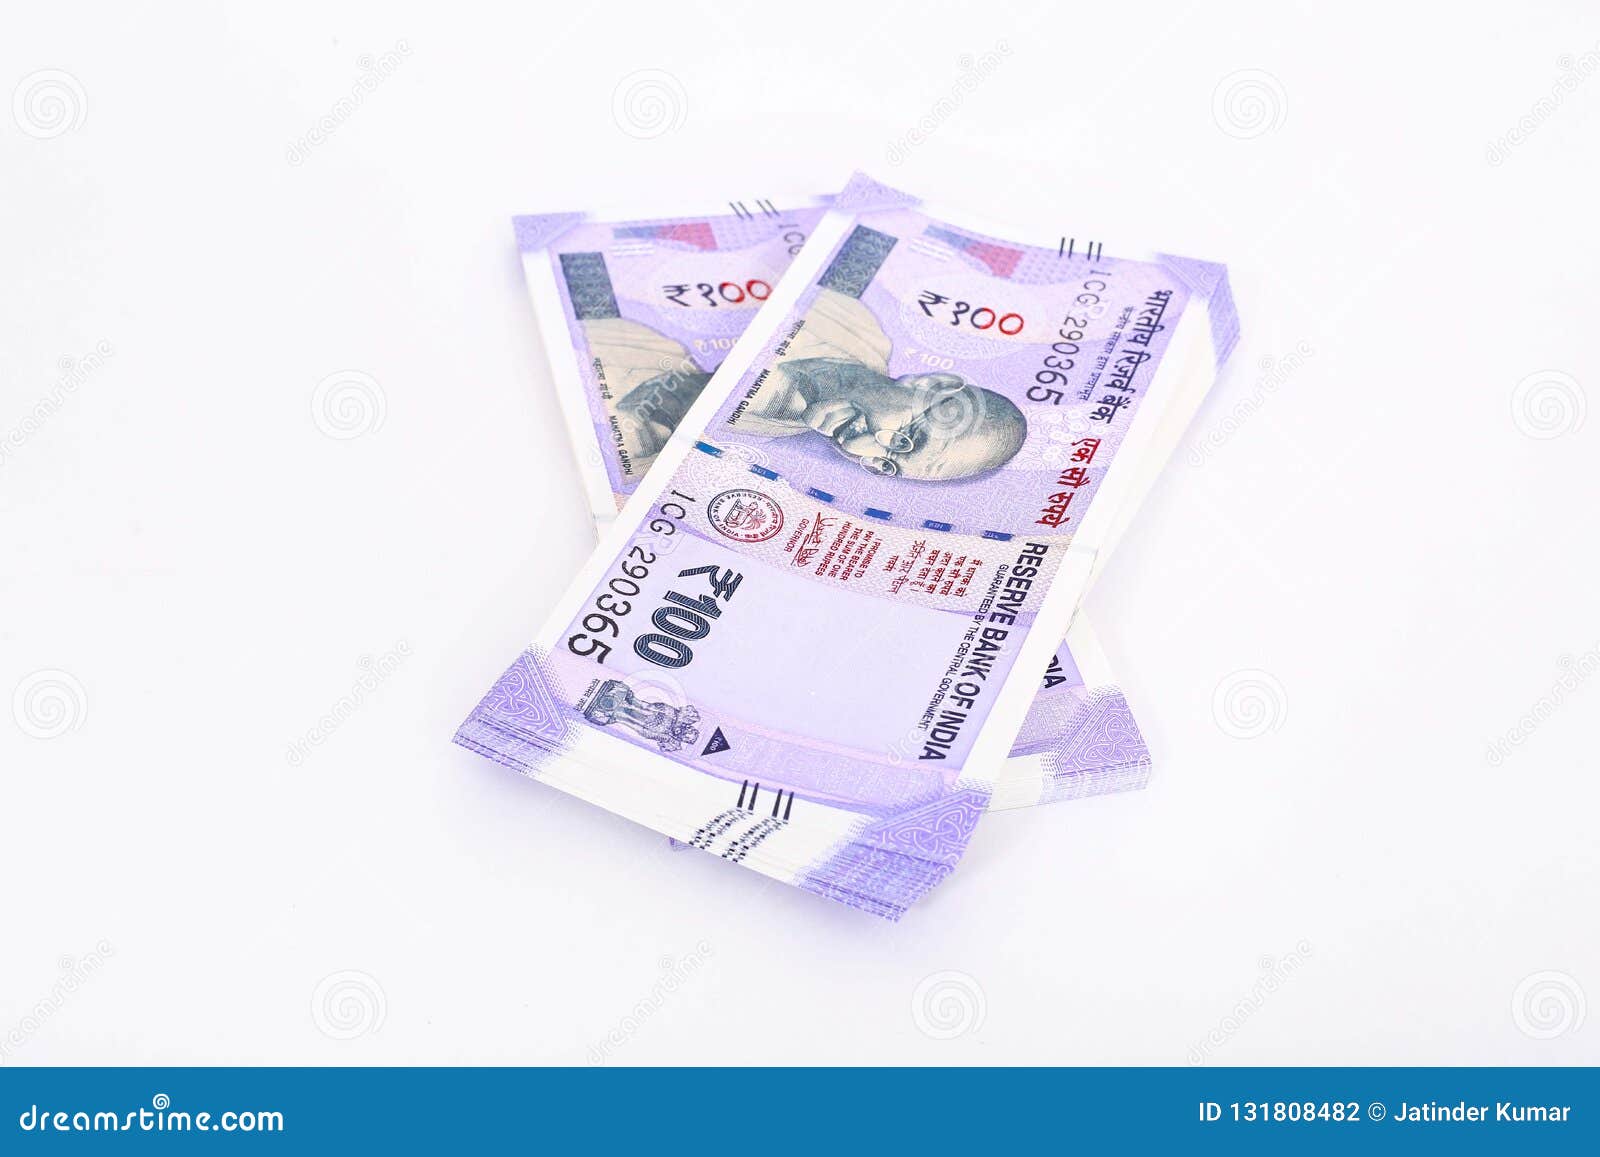 New Pack Of Indian 100 Rupee Notes Stock Photo Image Of Bill Currencies